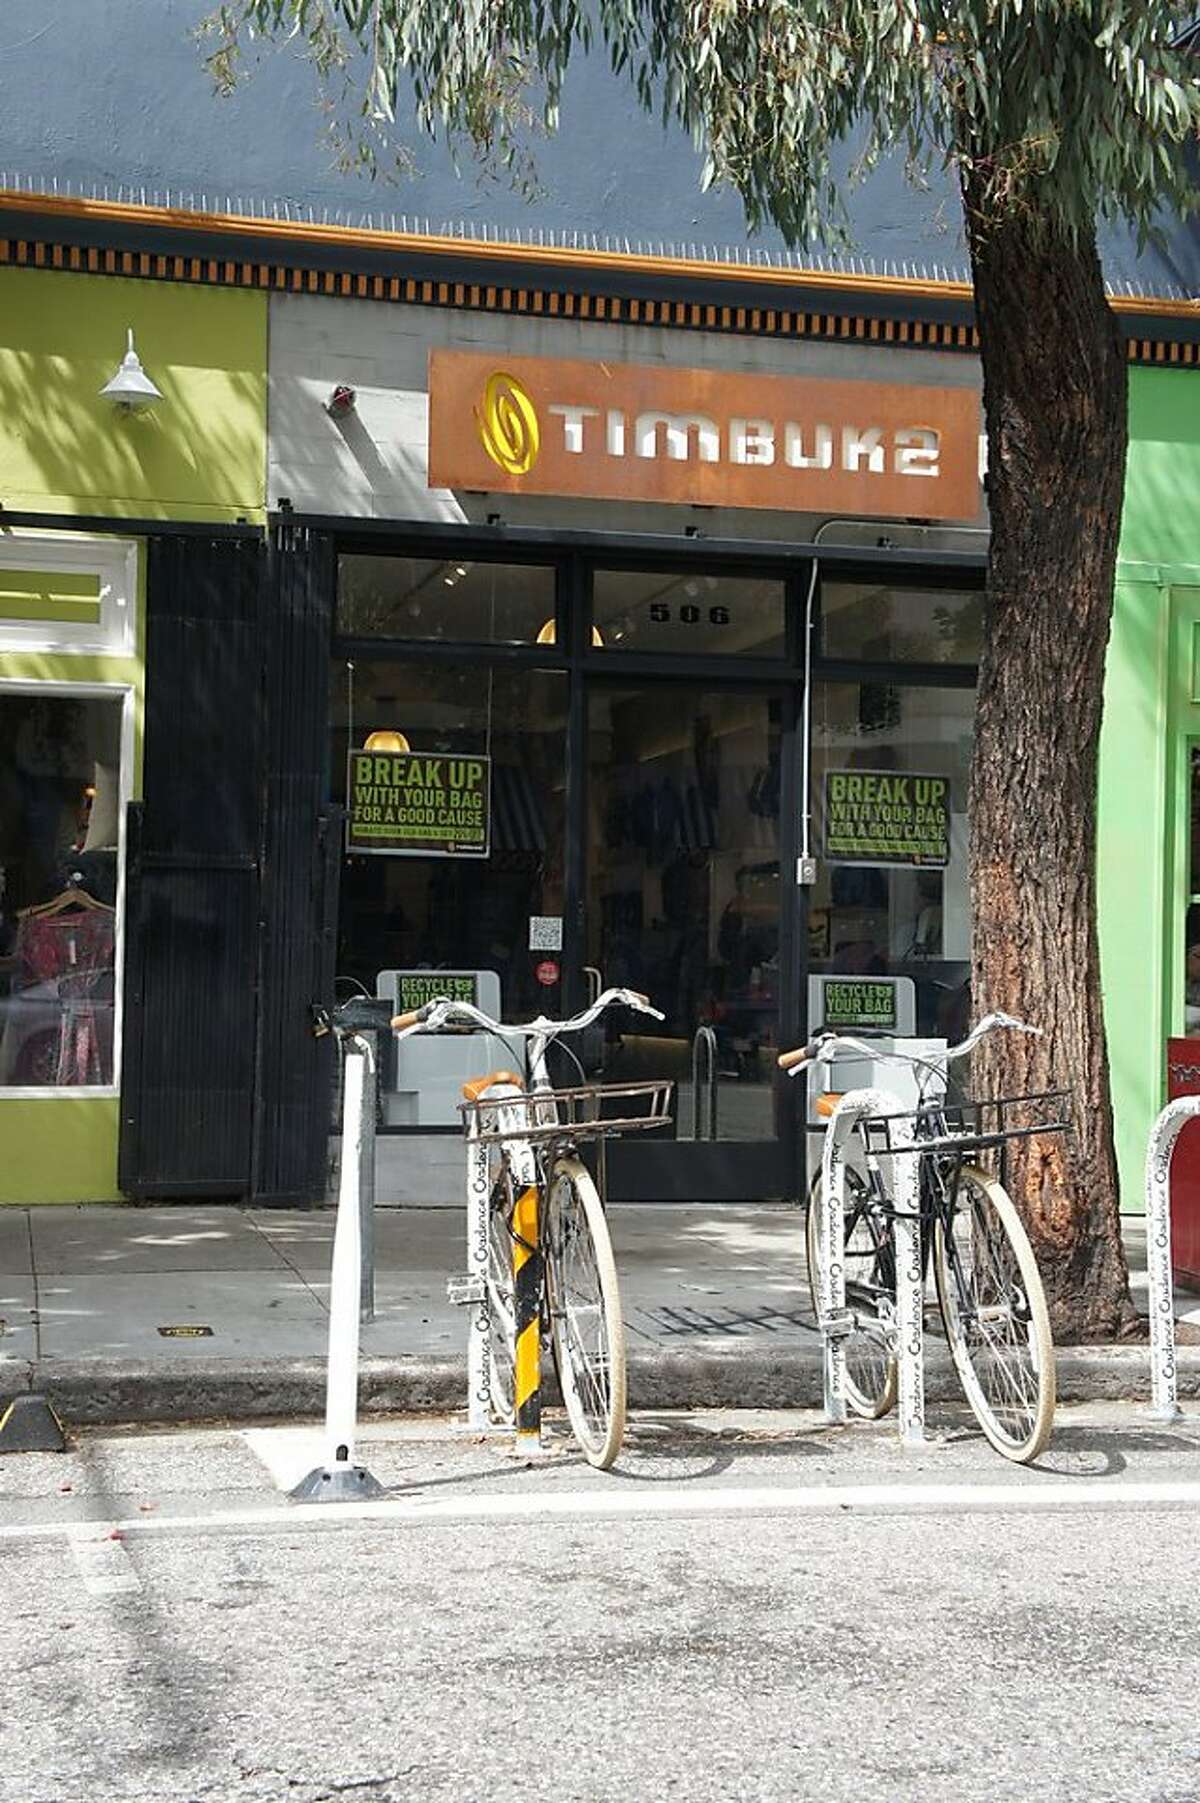 Timbuk2 began a free bike share program out of its Hayes Valley storefront.